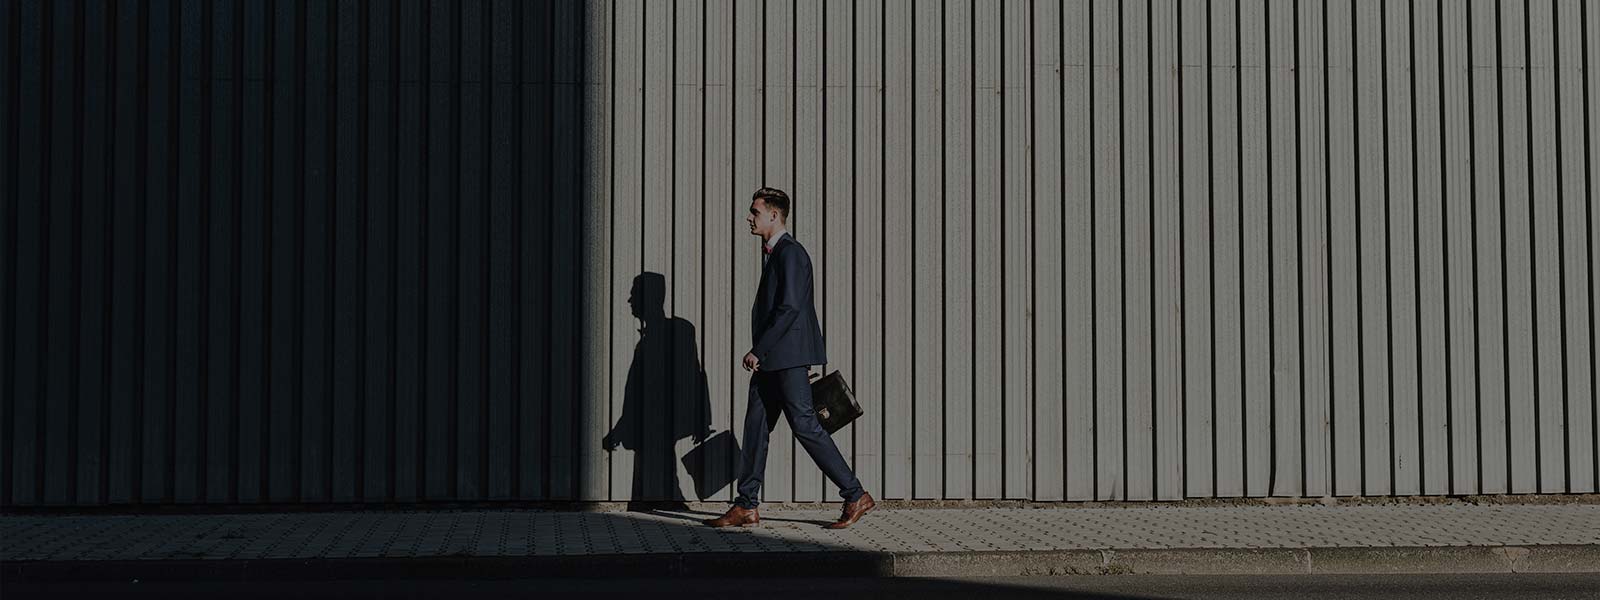 A man going to the office